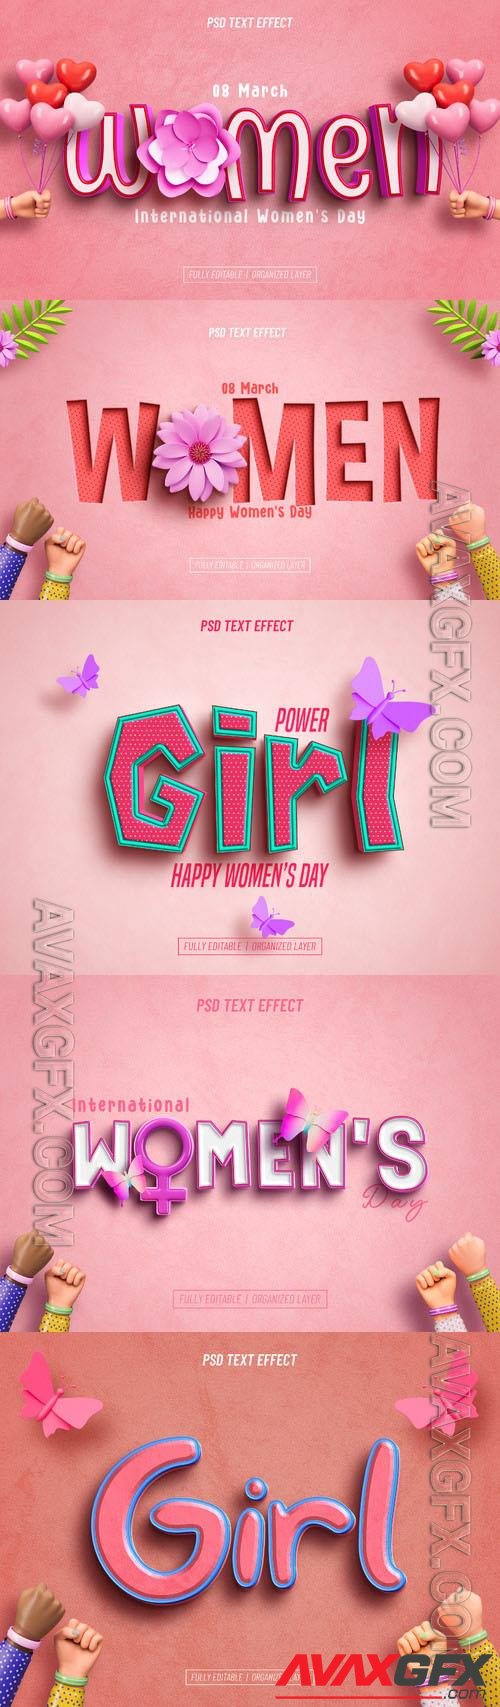 Womens day psd style text effect editable design  collection vol 2 [PSD]